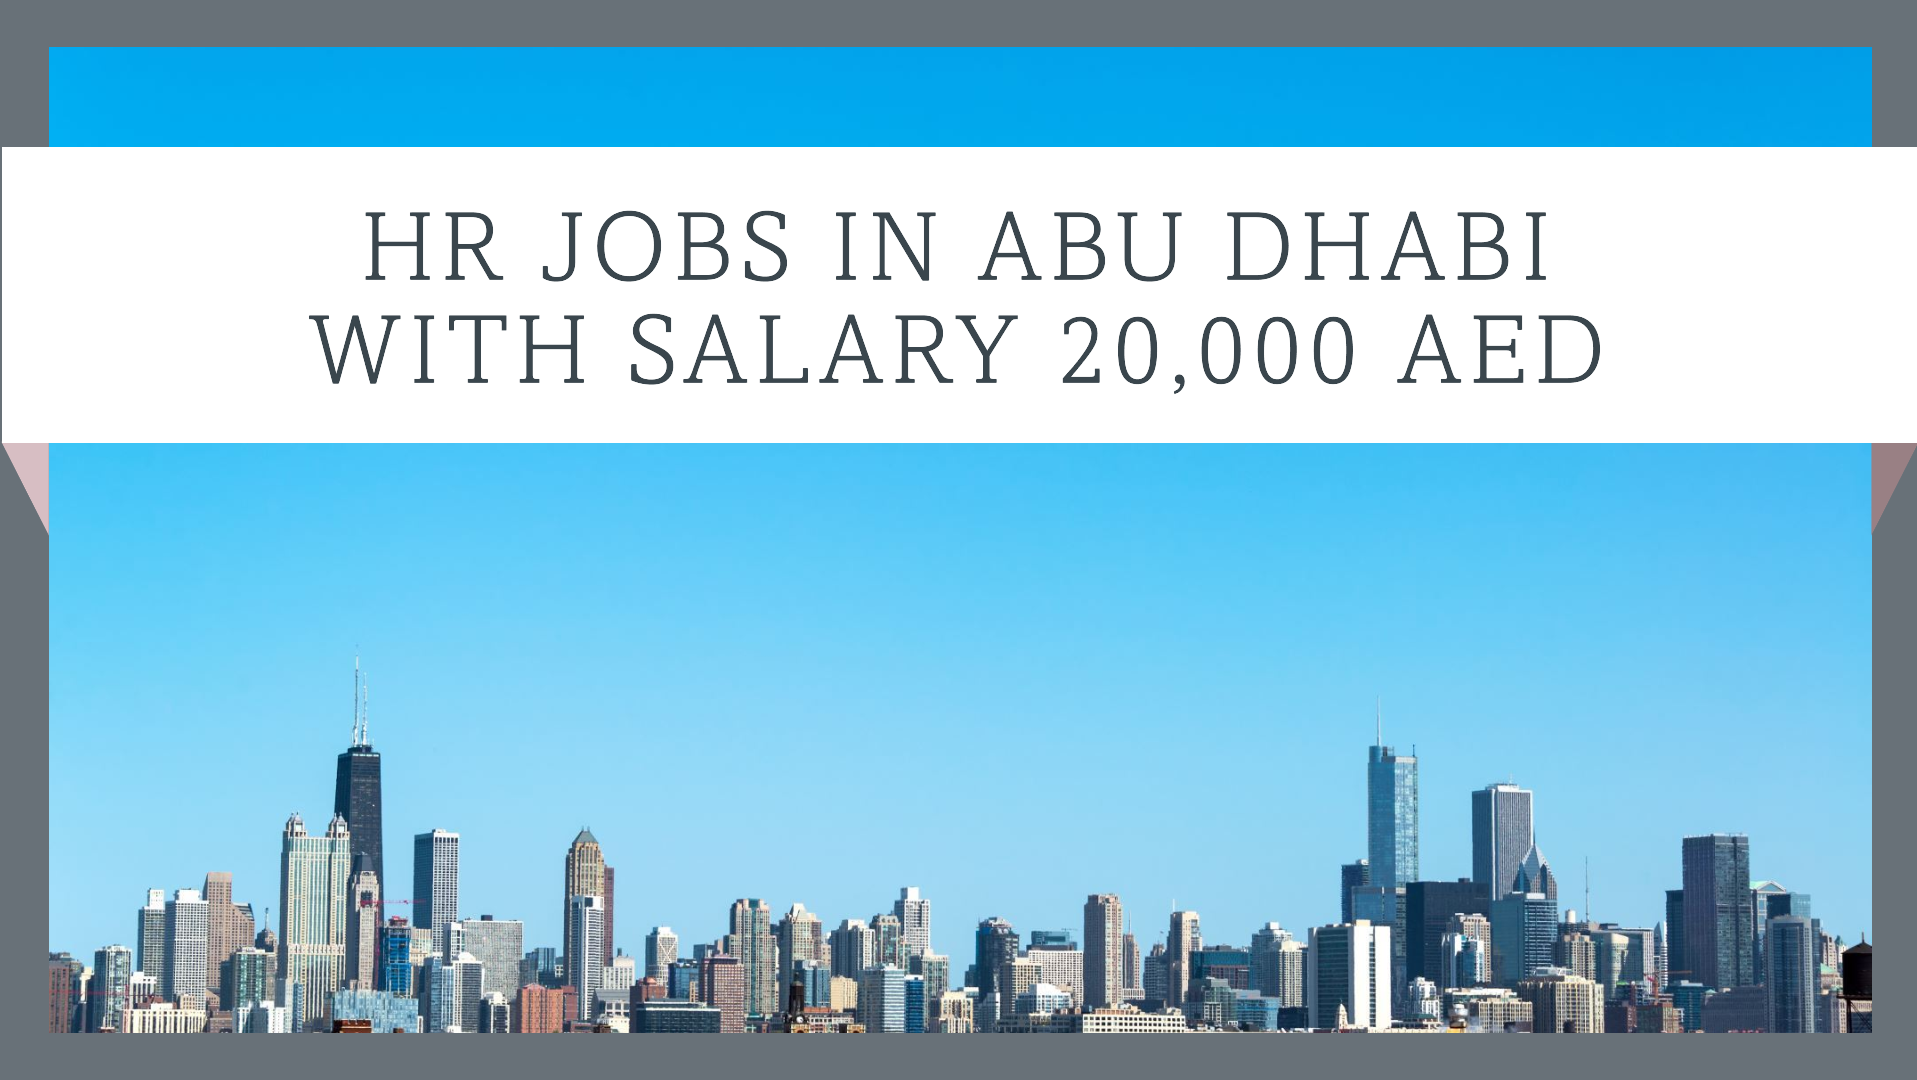 hr jobs in abu dhabi with salary 20,000 AED